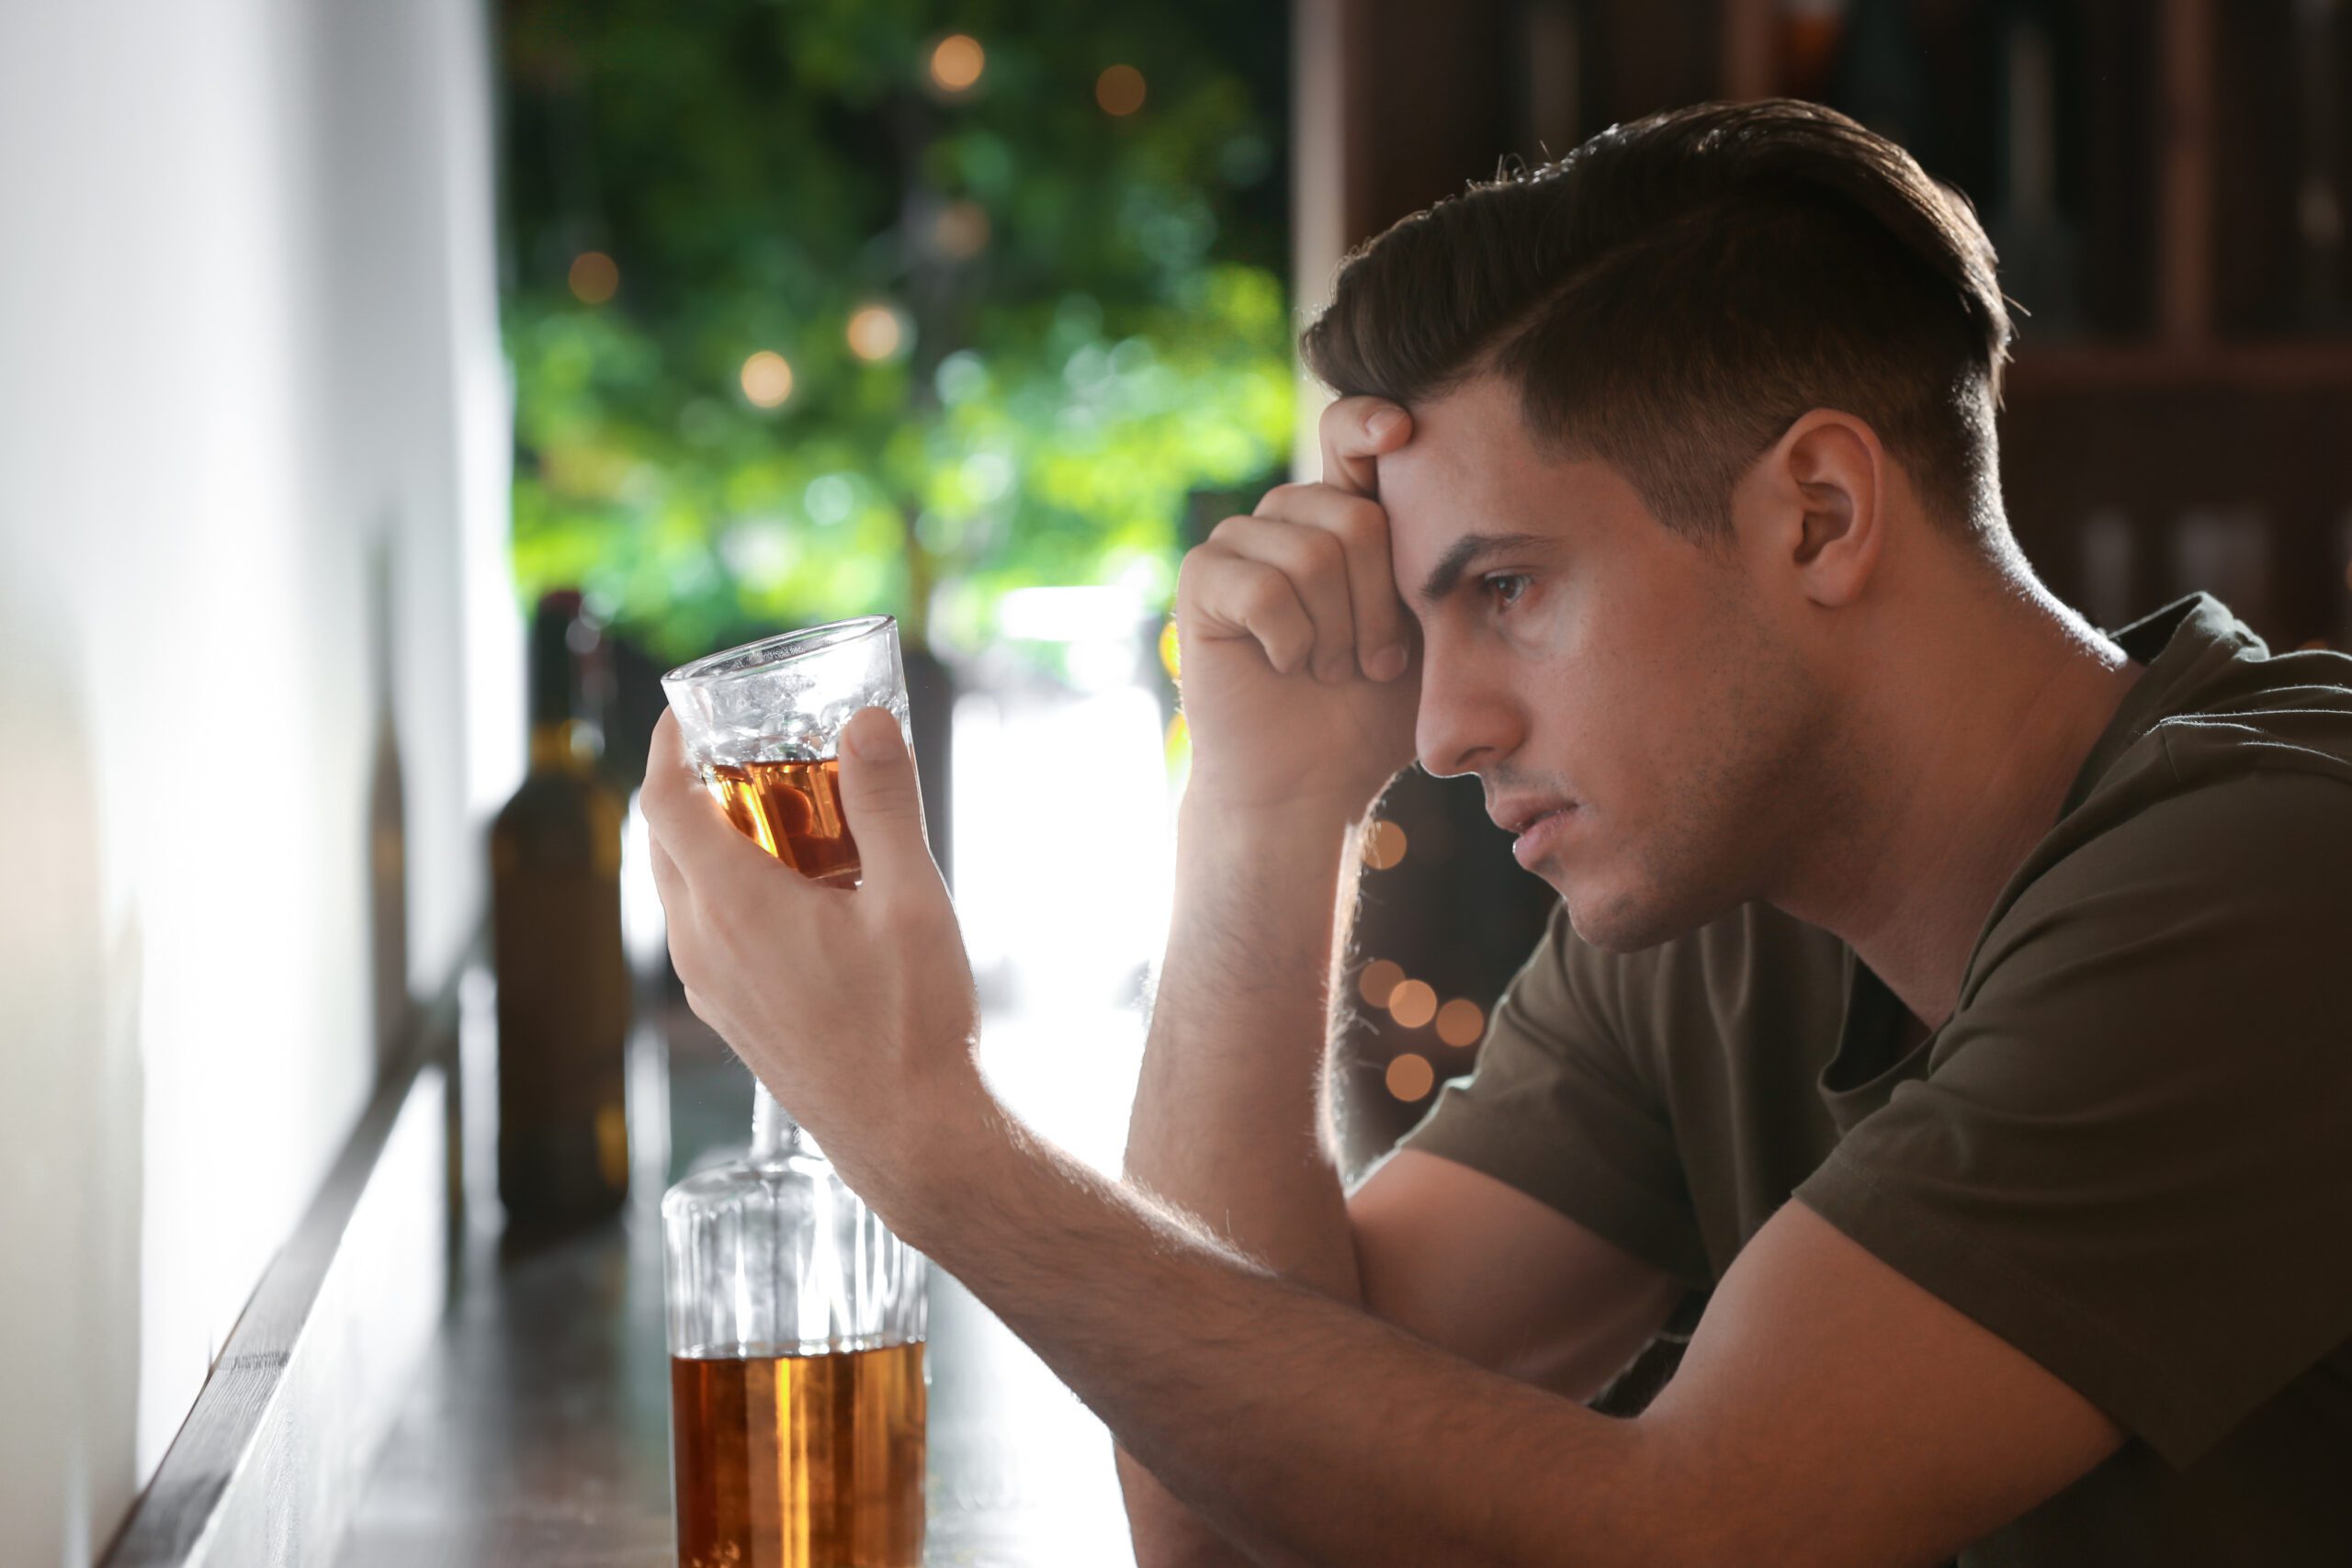 Signs of addiction, Signs of an Alcohol Issue, Signs of Alcohol Misuse